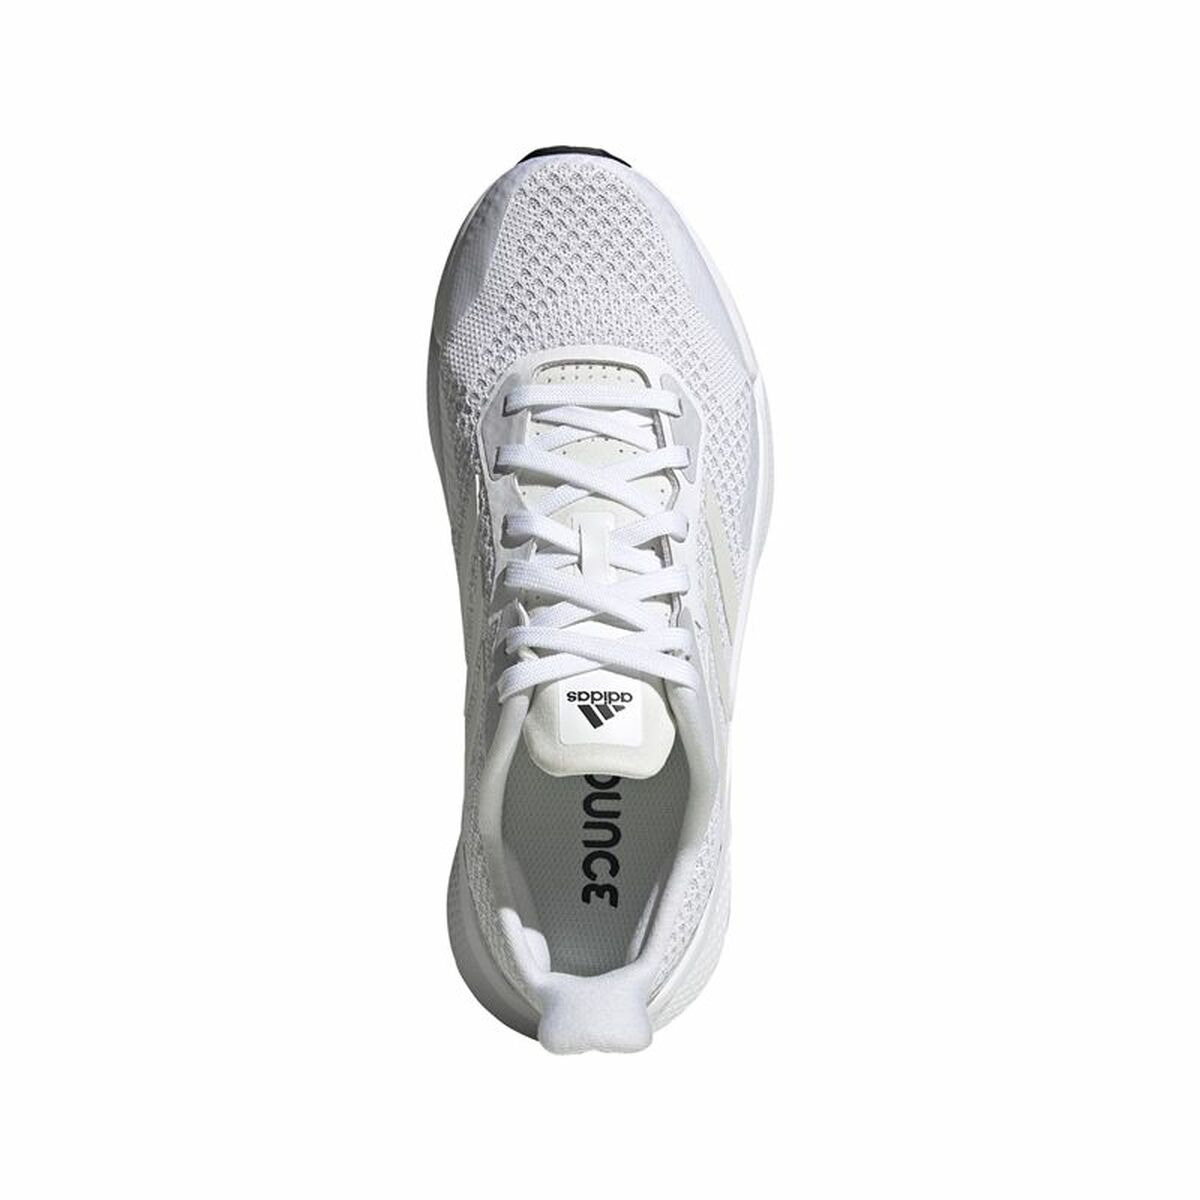 Running Shoes for Adults Adidas X9000L2 White Lady